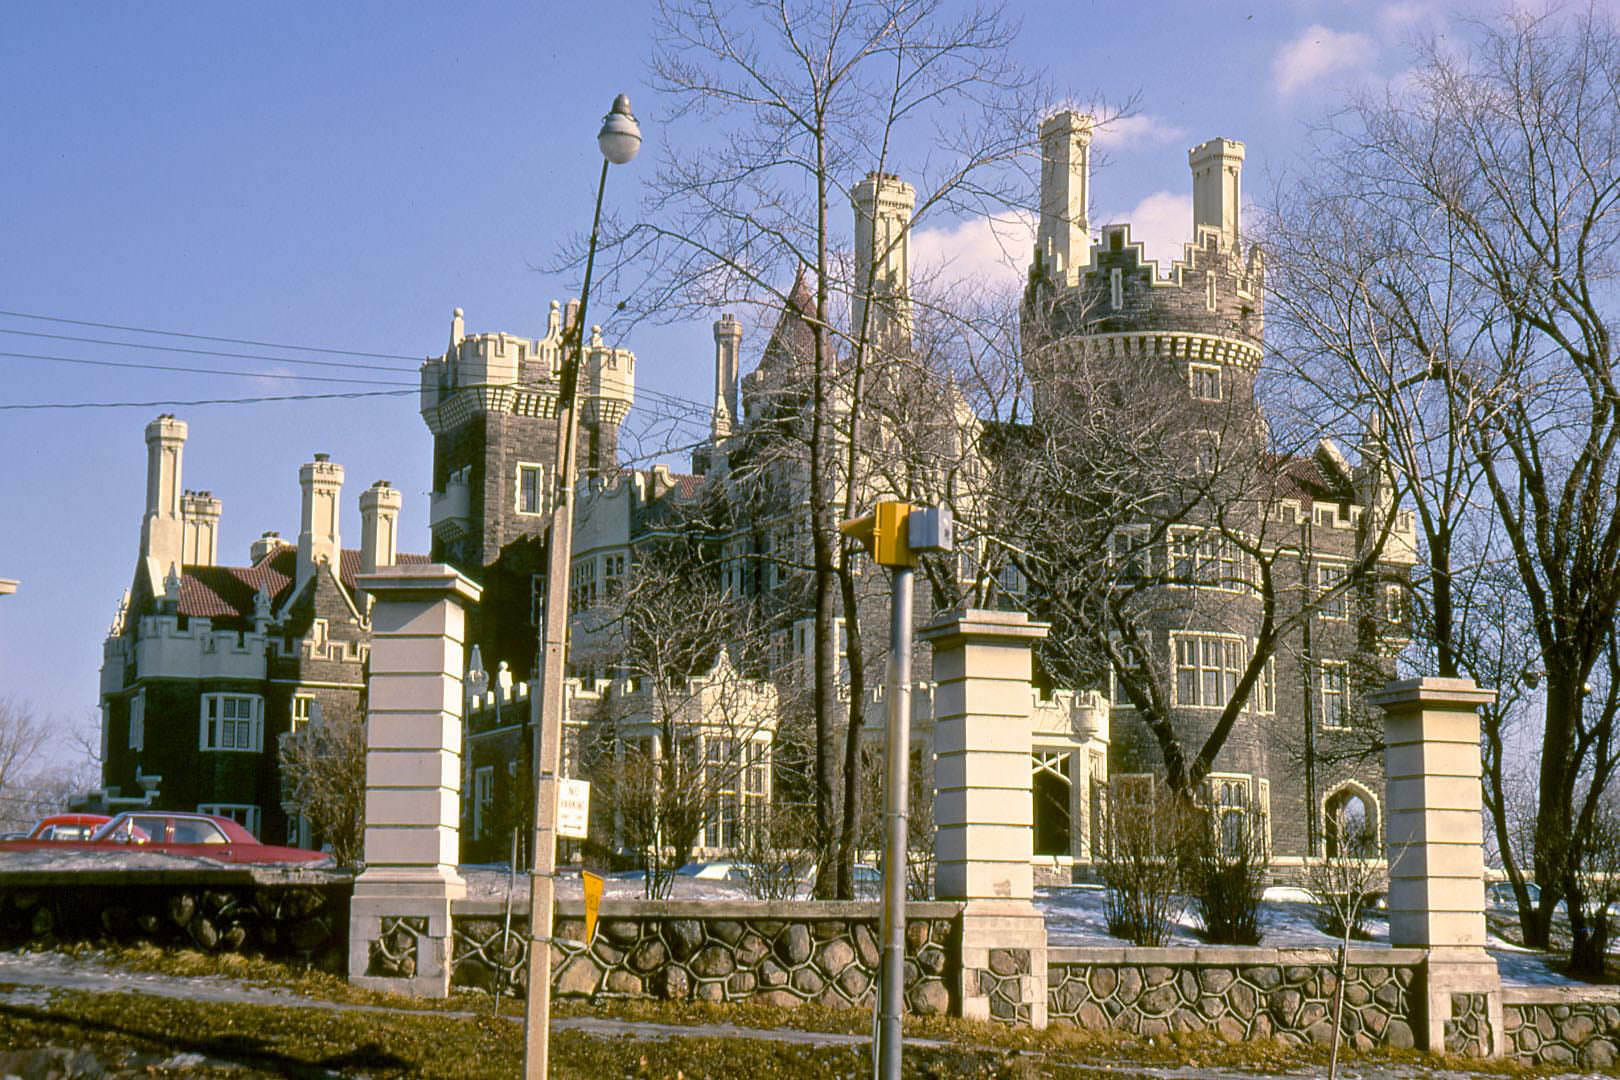 Another photo of Casa Loma, captured by my father in March 1970.